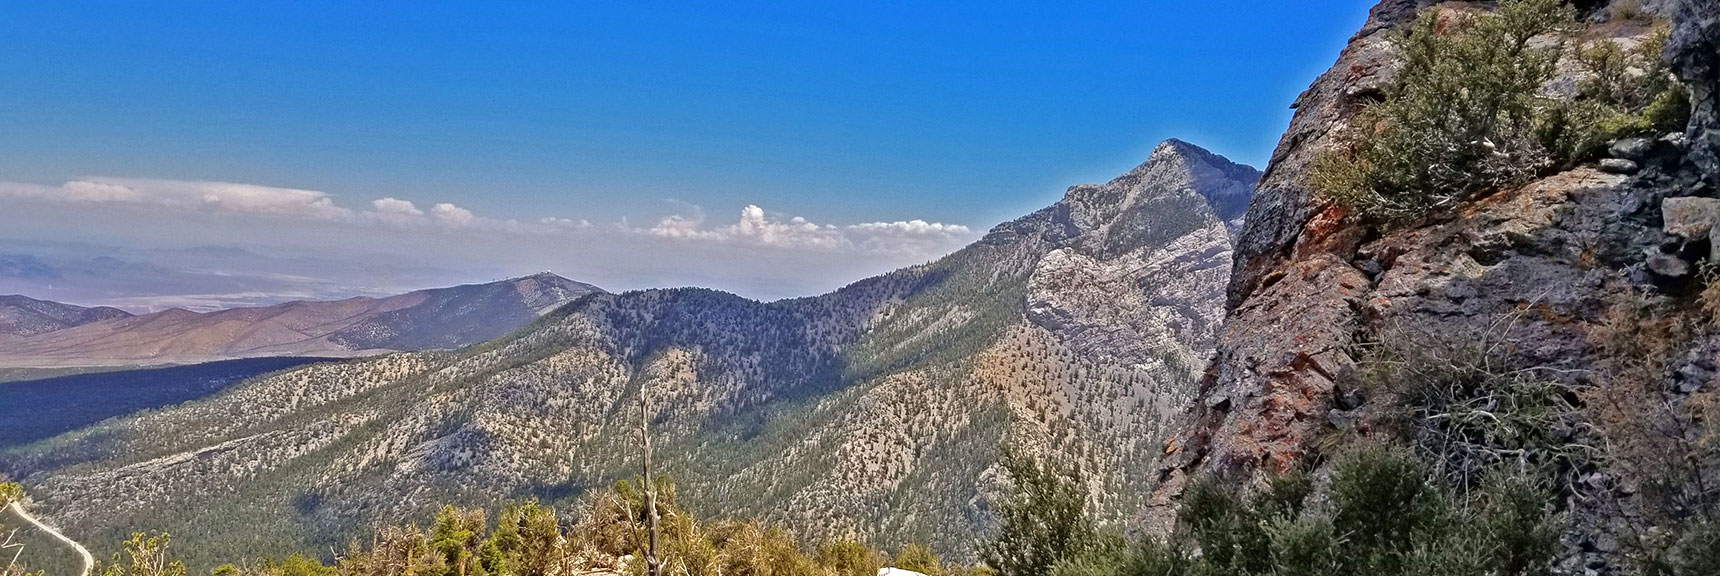 Angel Peak and Portion of Mummy's Head from NE Edge of Black Rock Sister | Black Rock Sister | Mt Charleston Wilderness | Lee Canyon | Spring Mountains, Nevada